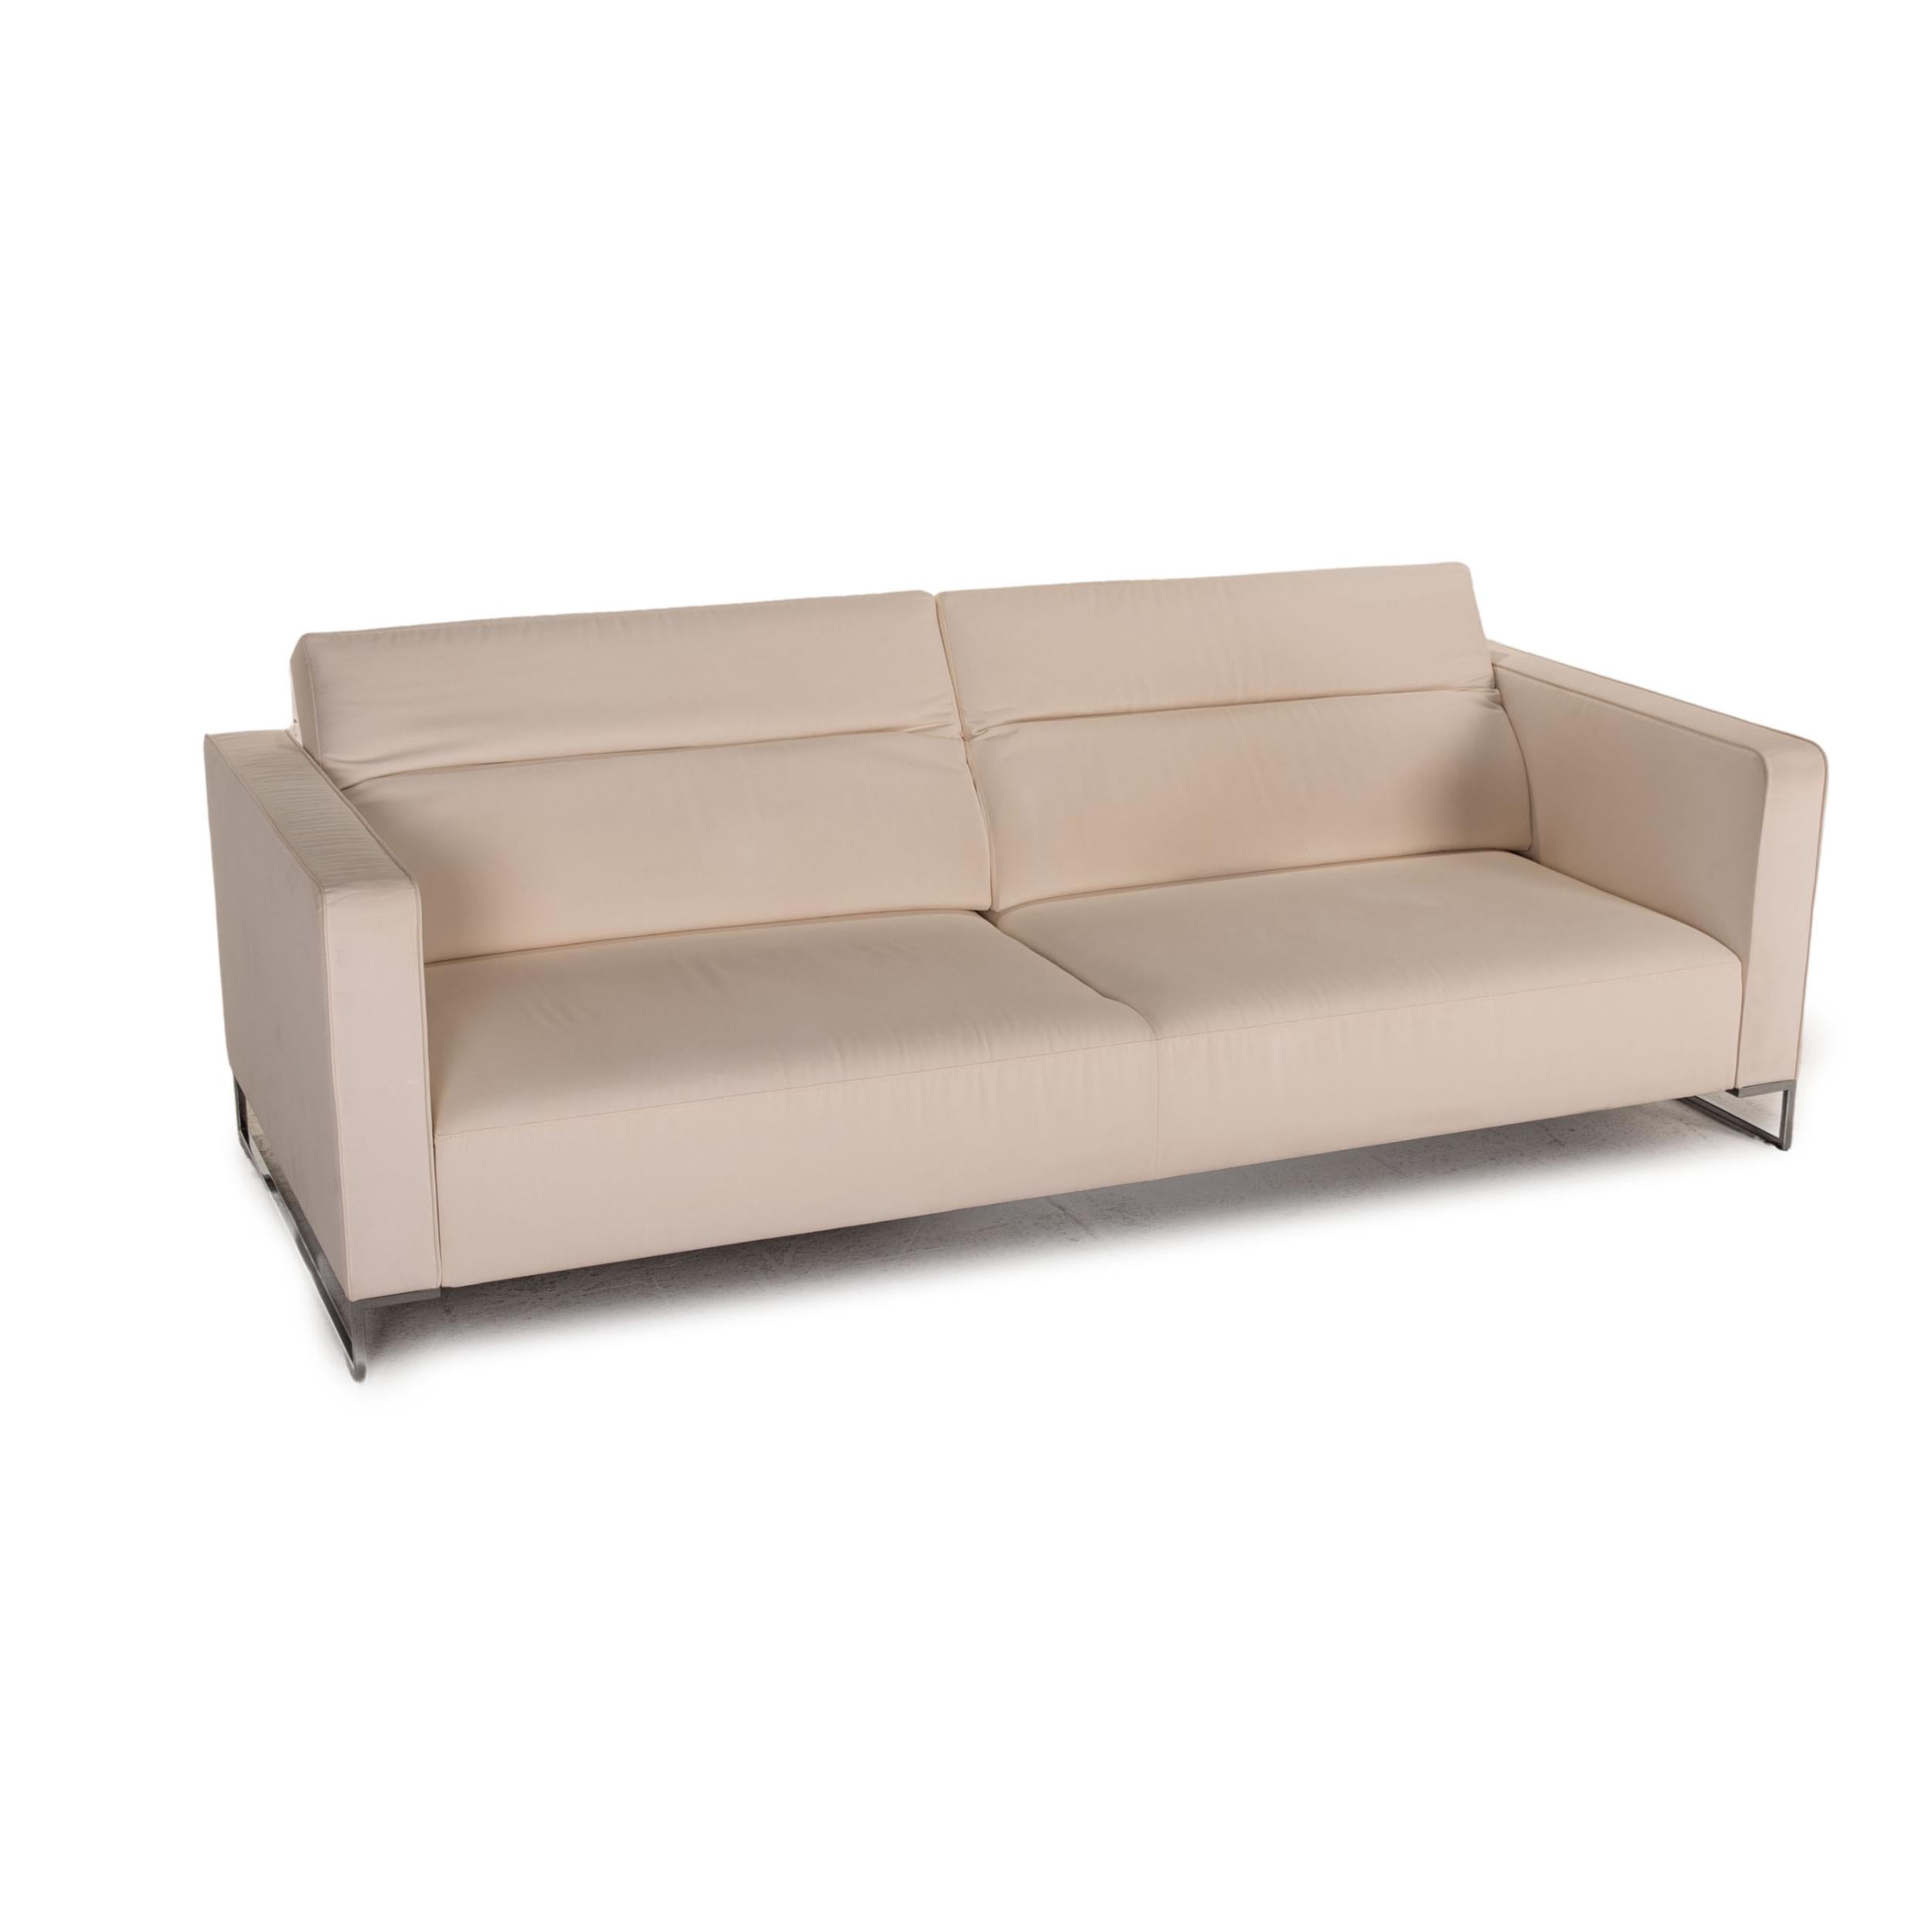 3 seat couch dimensions